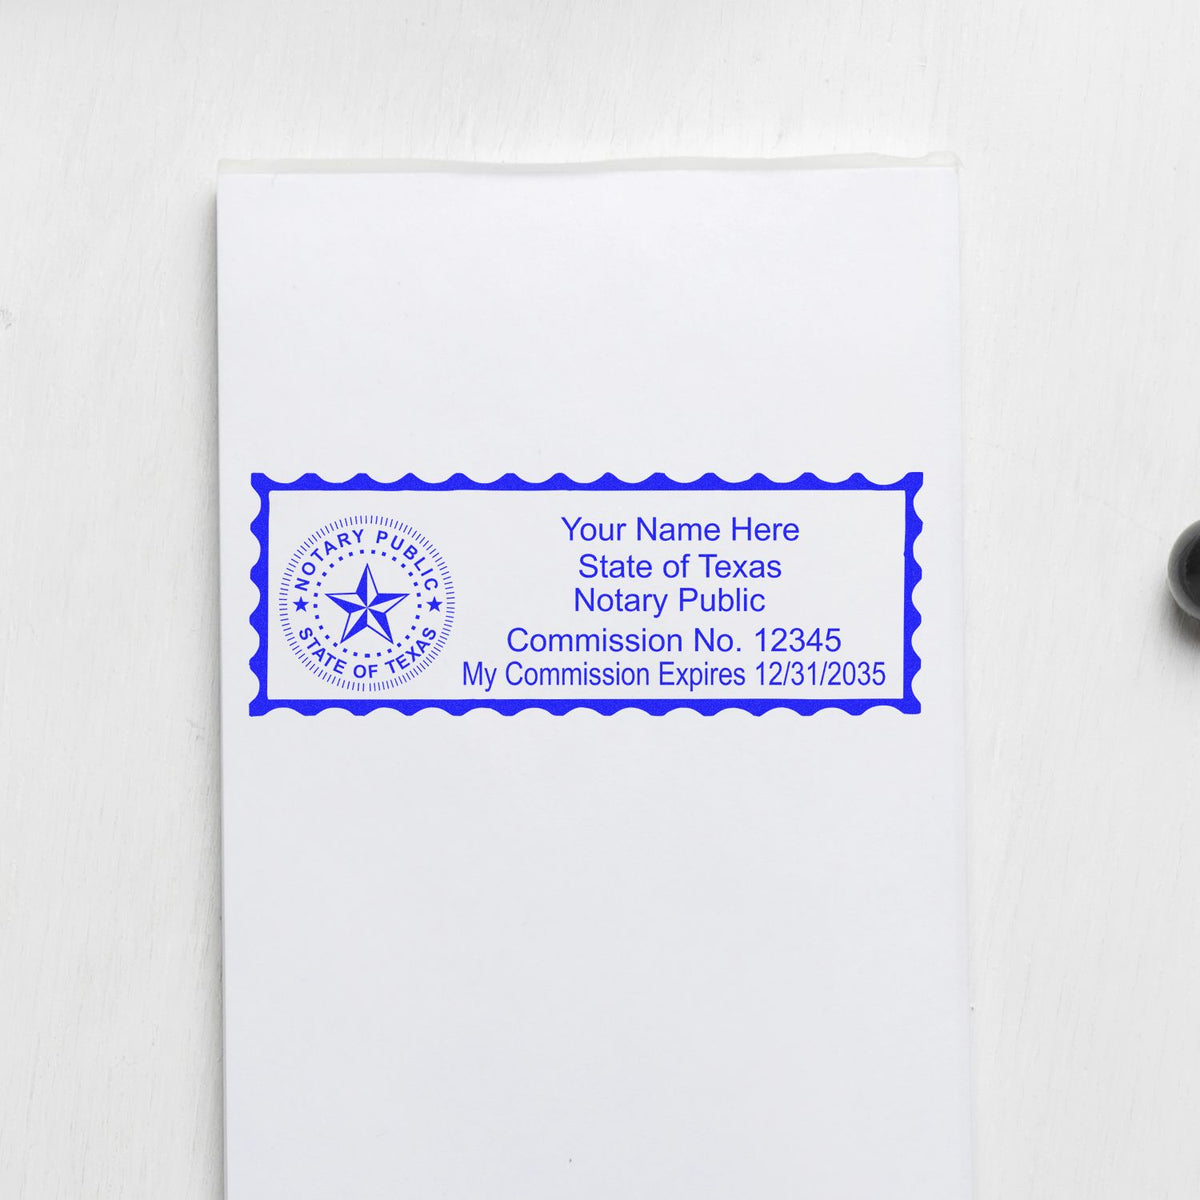 An alternative view of the Super Slim Texas Notary Public Stamp stamped on a sheet of paper showing the image in use